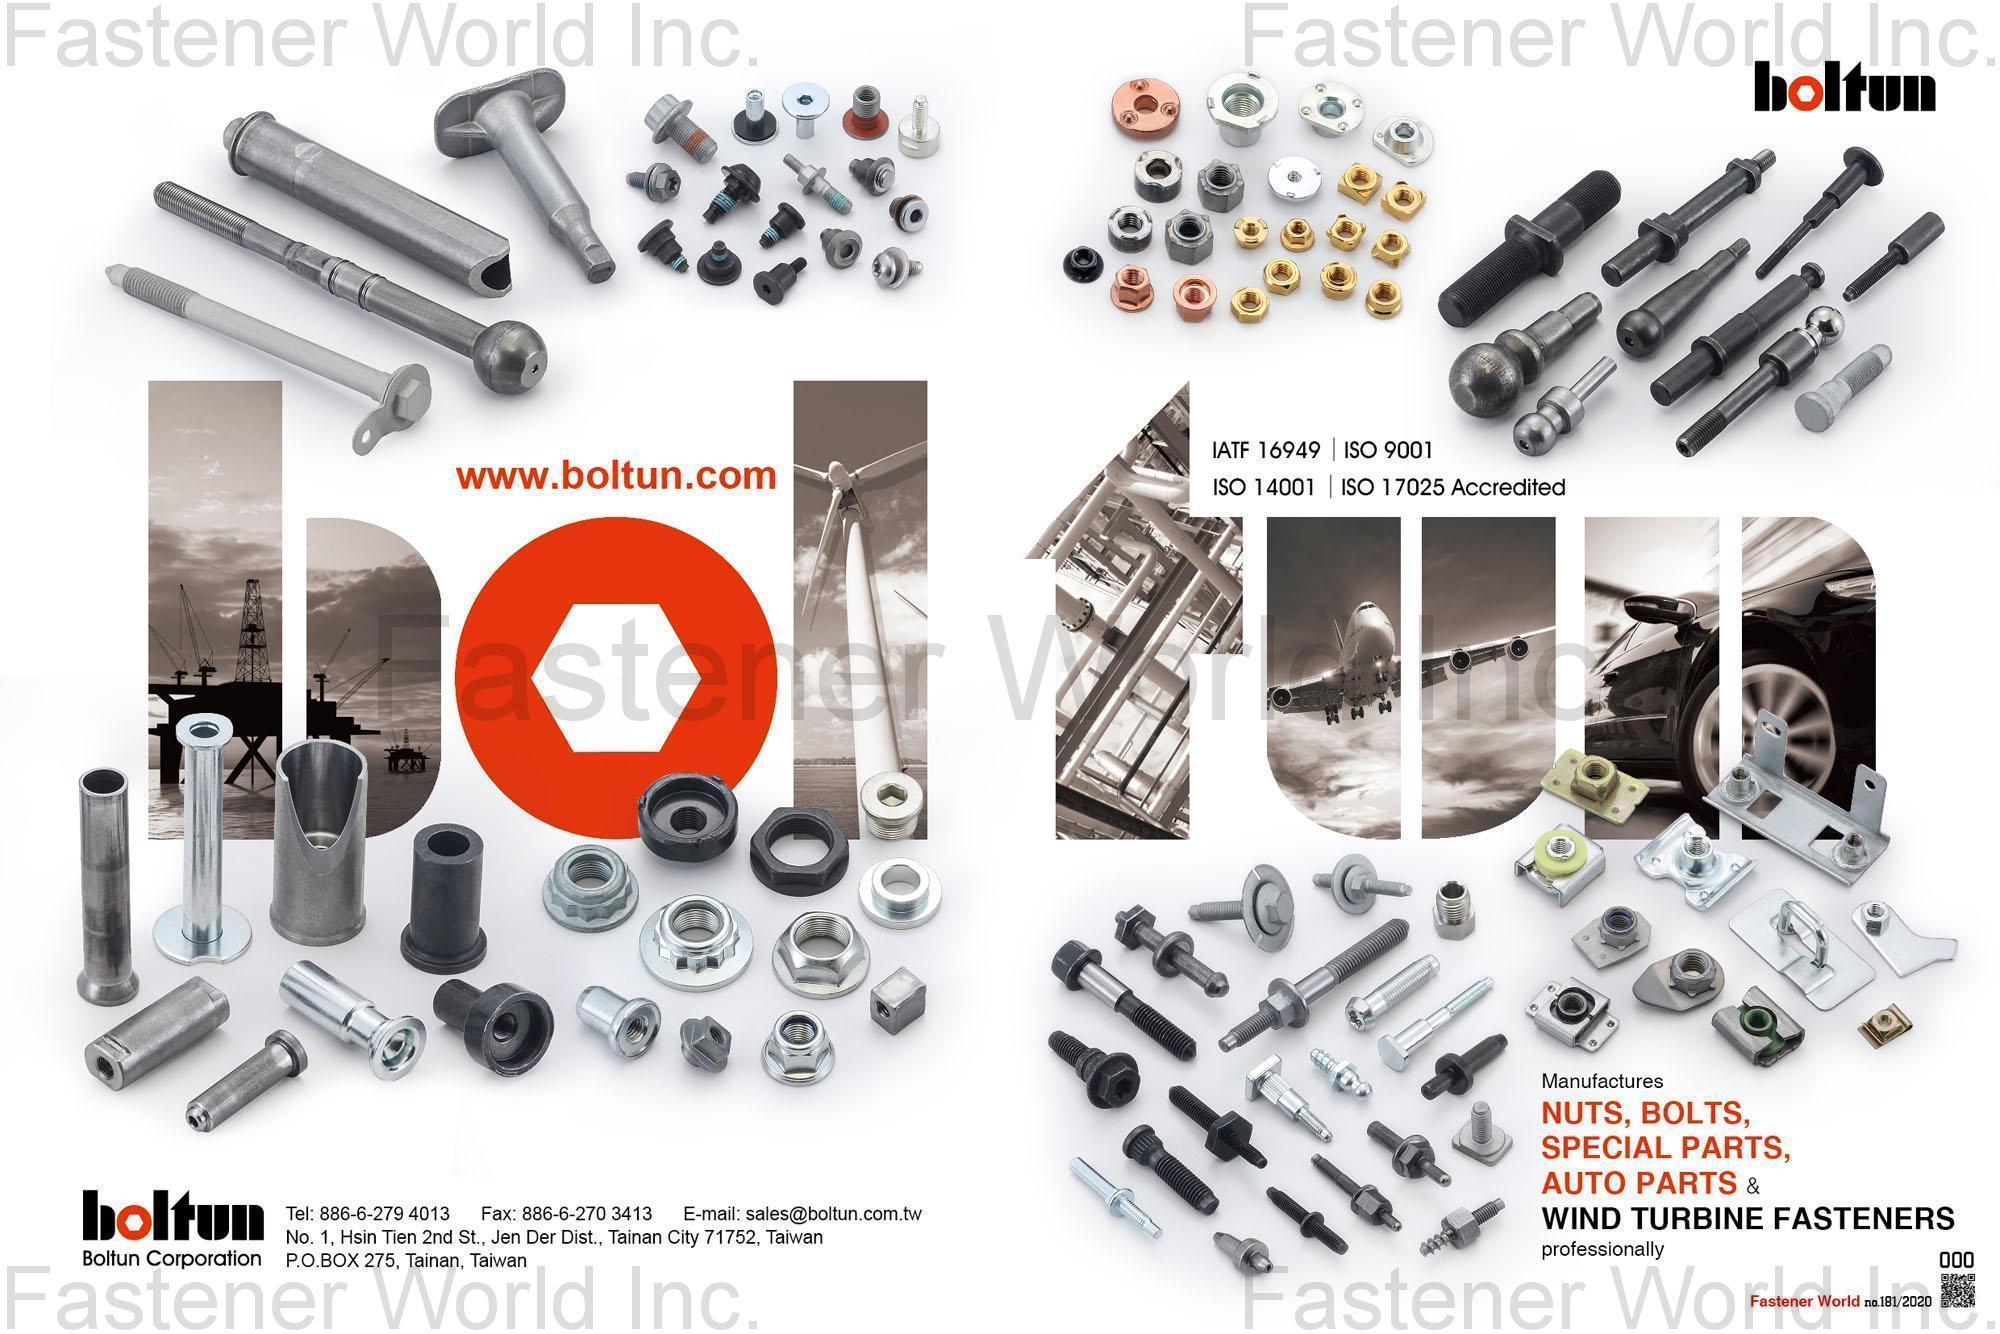  Welding Nuts,Rivet Nuts,Clinch Nuts,Locking Nuts,Nylon Insert Nuts,Conical Washer Nuts,T-Nuts,CNC Machining Parts,Stamping Parts,Bushed & Sleeves,Assembly Components,Special Parts,HEX. Bolt & Screw,Flange Bolt,Socket,Sems,Screw With Welding Projection,Screw With Welding Ring & Points,Clinch Bolt,T C Bolt,Special Pin,Wheel Bolt,Rail Bolt,Rail Bolts Construction Fasteners: Nuts, Screws & Washers,Wind Turbine Fasteners Kits: Nuts, Bolts & Washers Truck Wheel Bolts,Bolts & Nuts & Components,Motorcycle parts,Nylon rings & special washer,Expansion Bolt